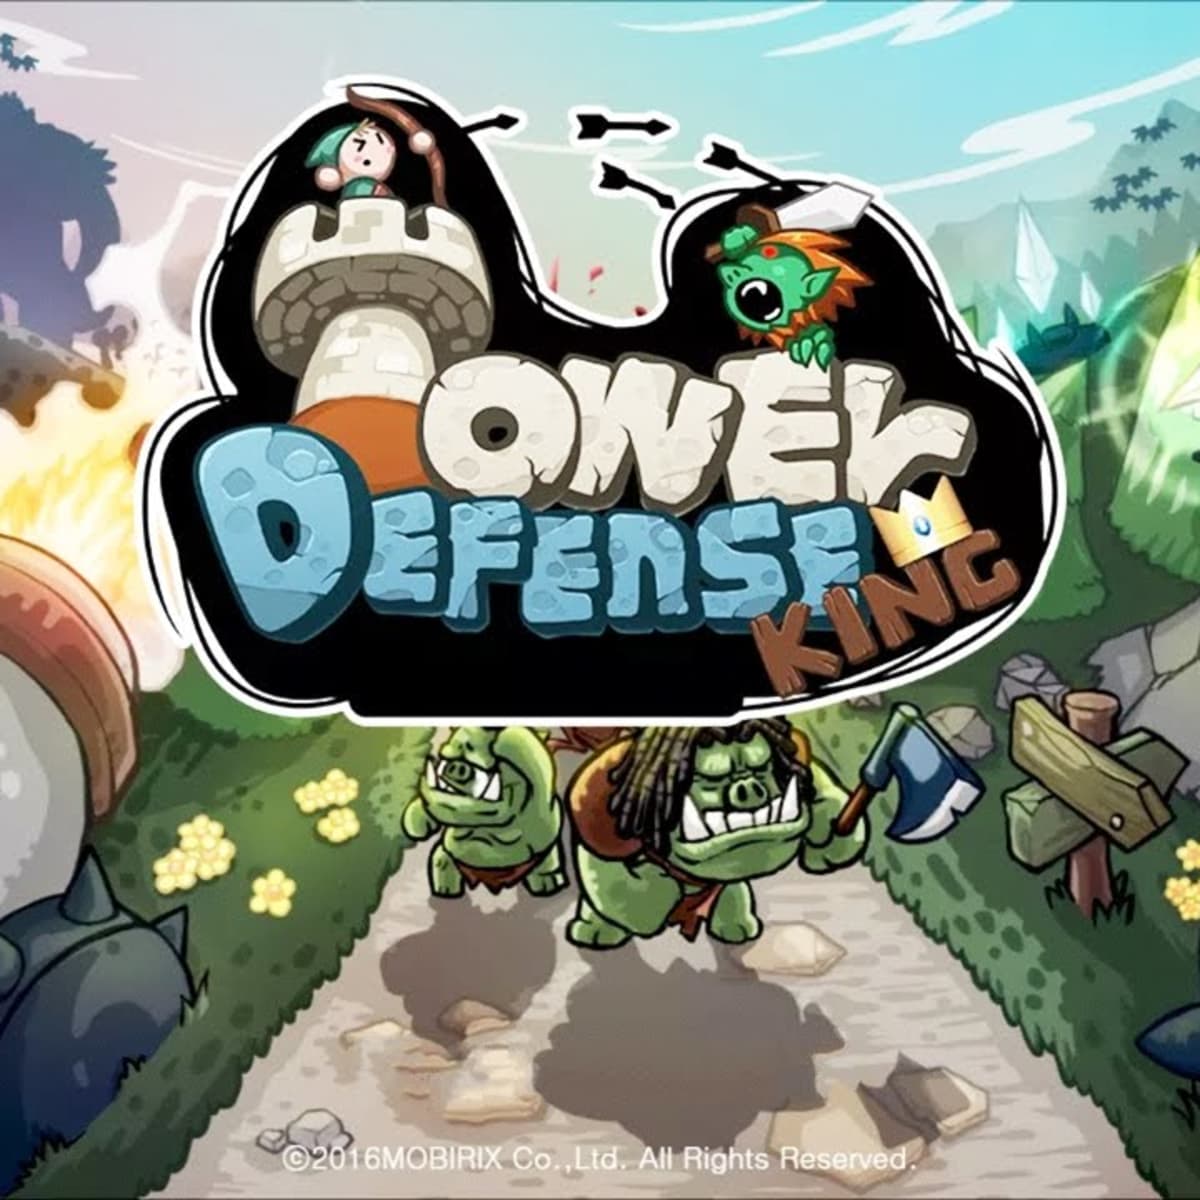 Tower Defence Game Hacks – Learn The 5 Best Tips & Tricks